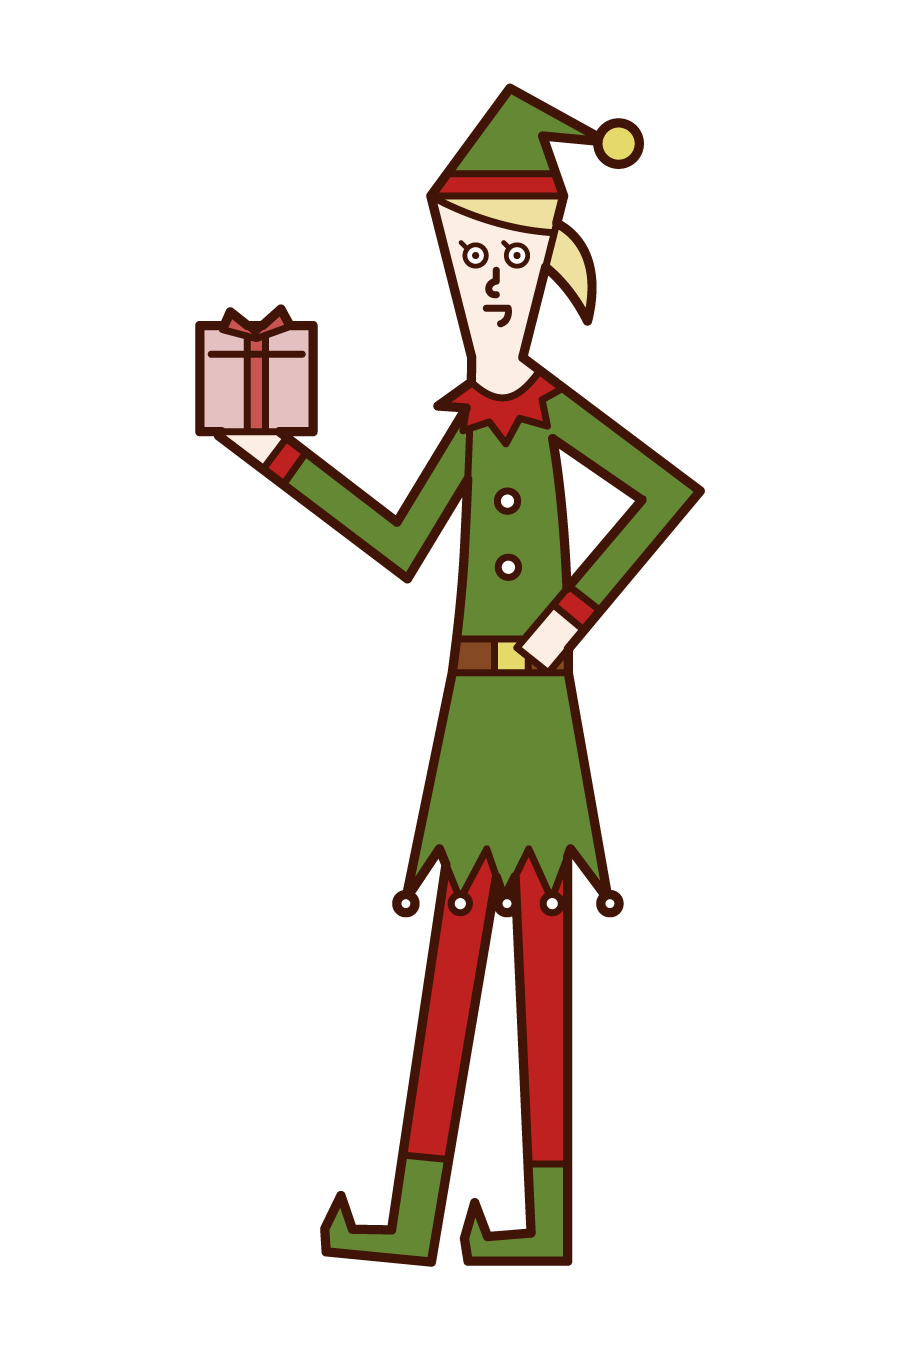 Illustration of a woman in a Christmas elf costume